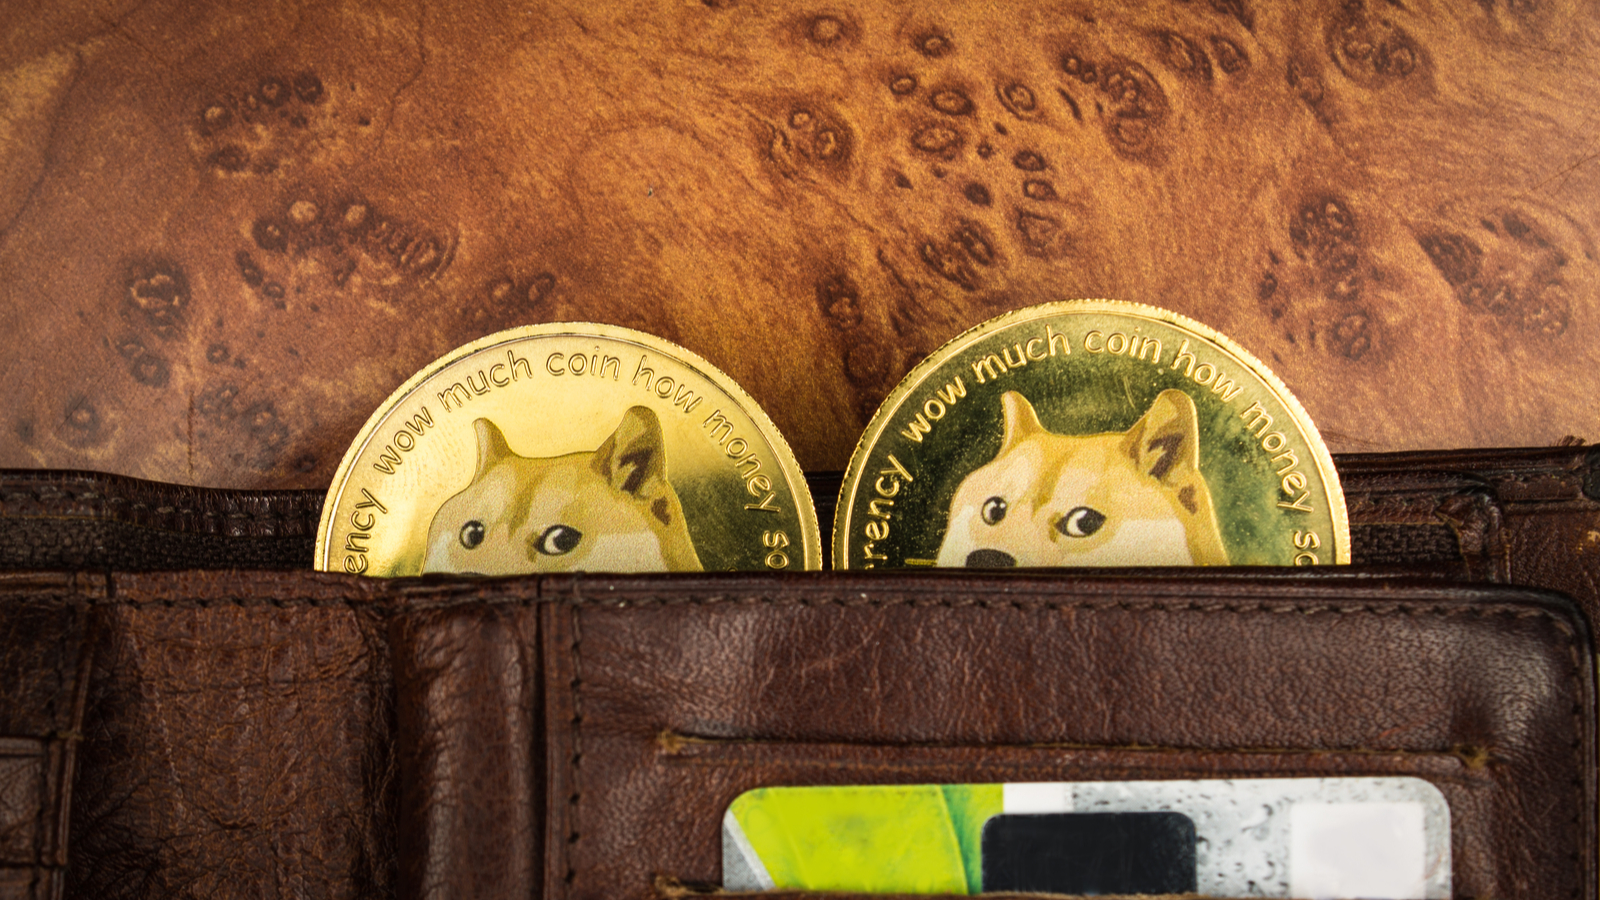 Dogecoin coins with doge faces peeking out of brown leather wallet. The coins have the words "wow much coin how money" embossed on them. Dogecoin Price Predictions